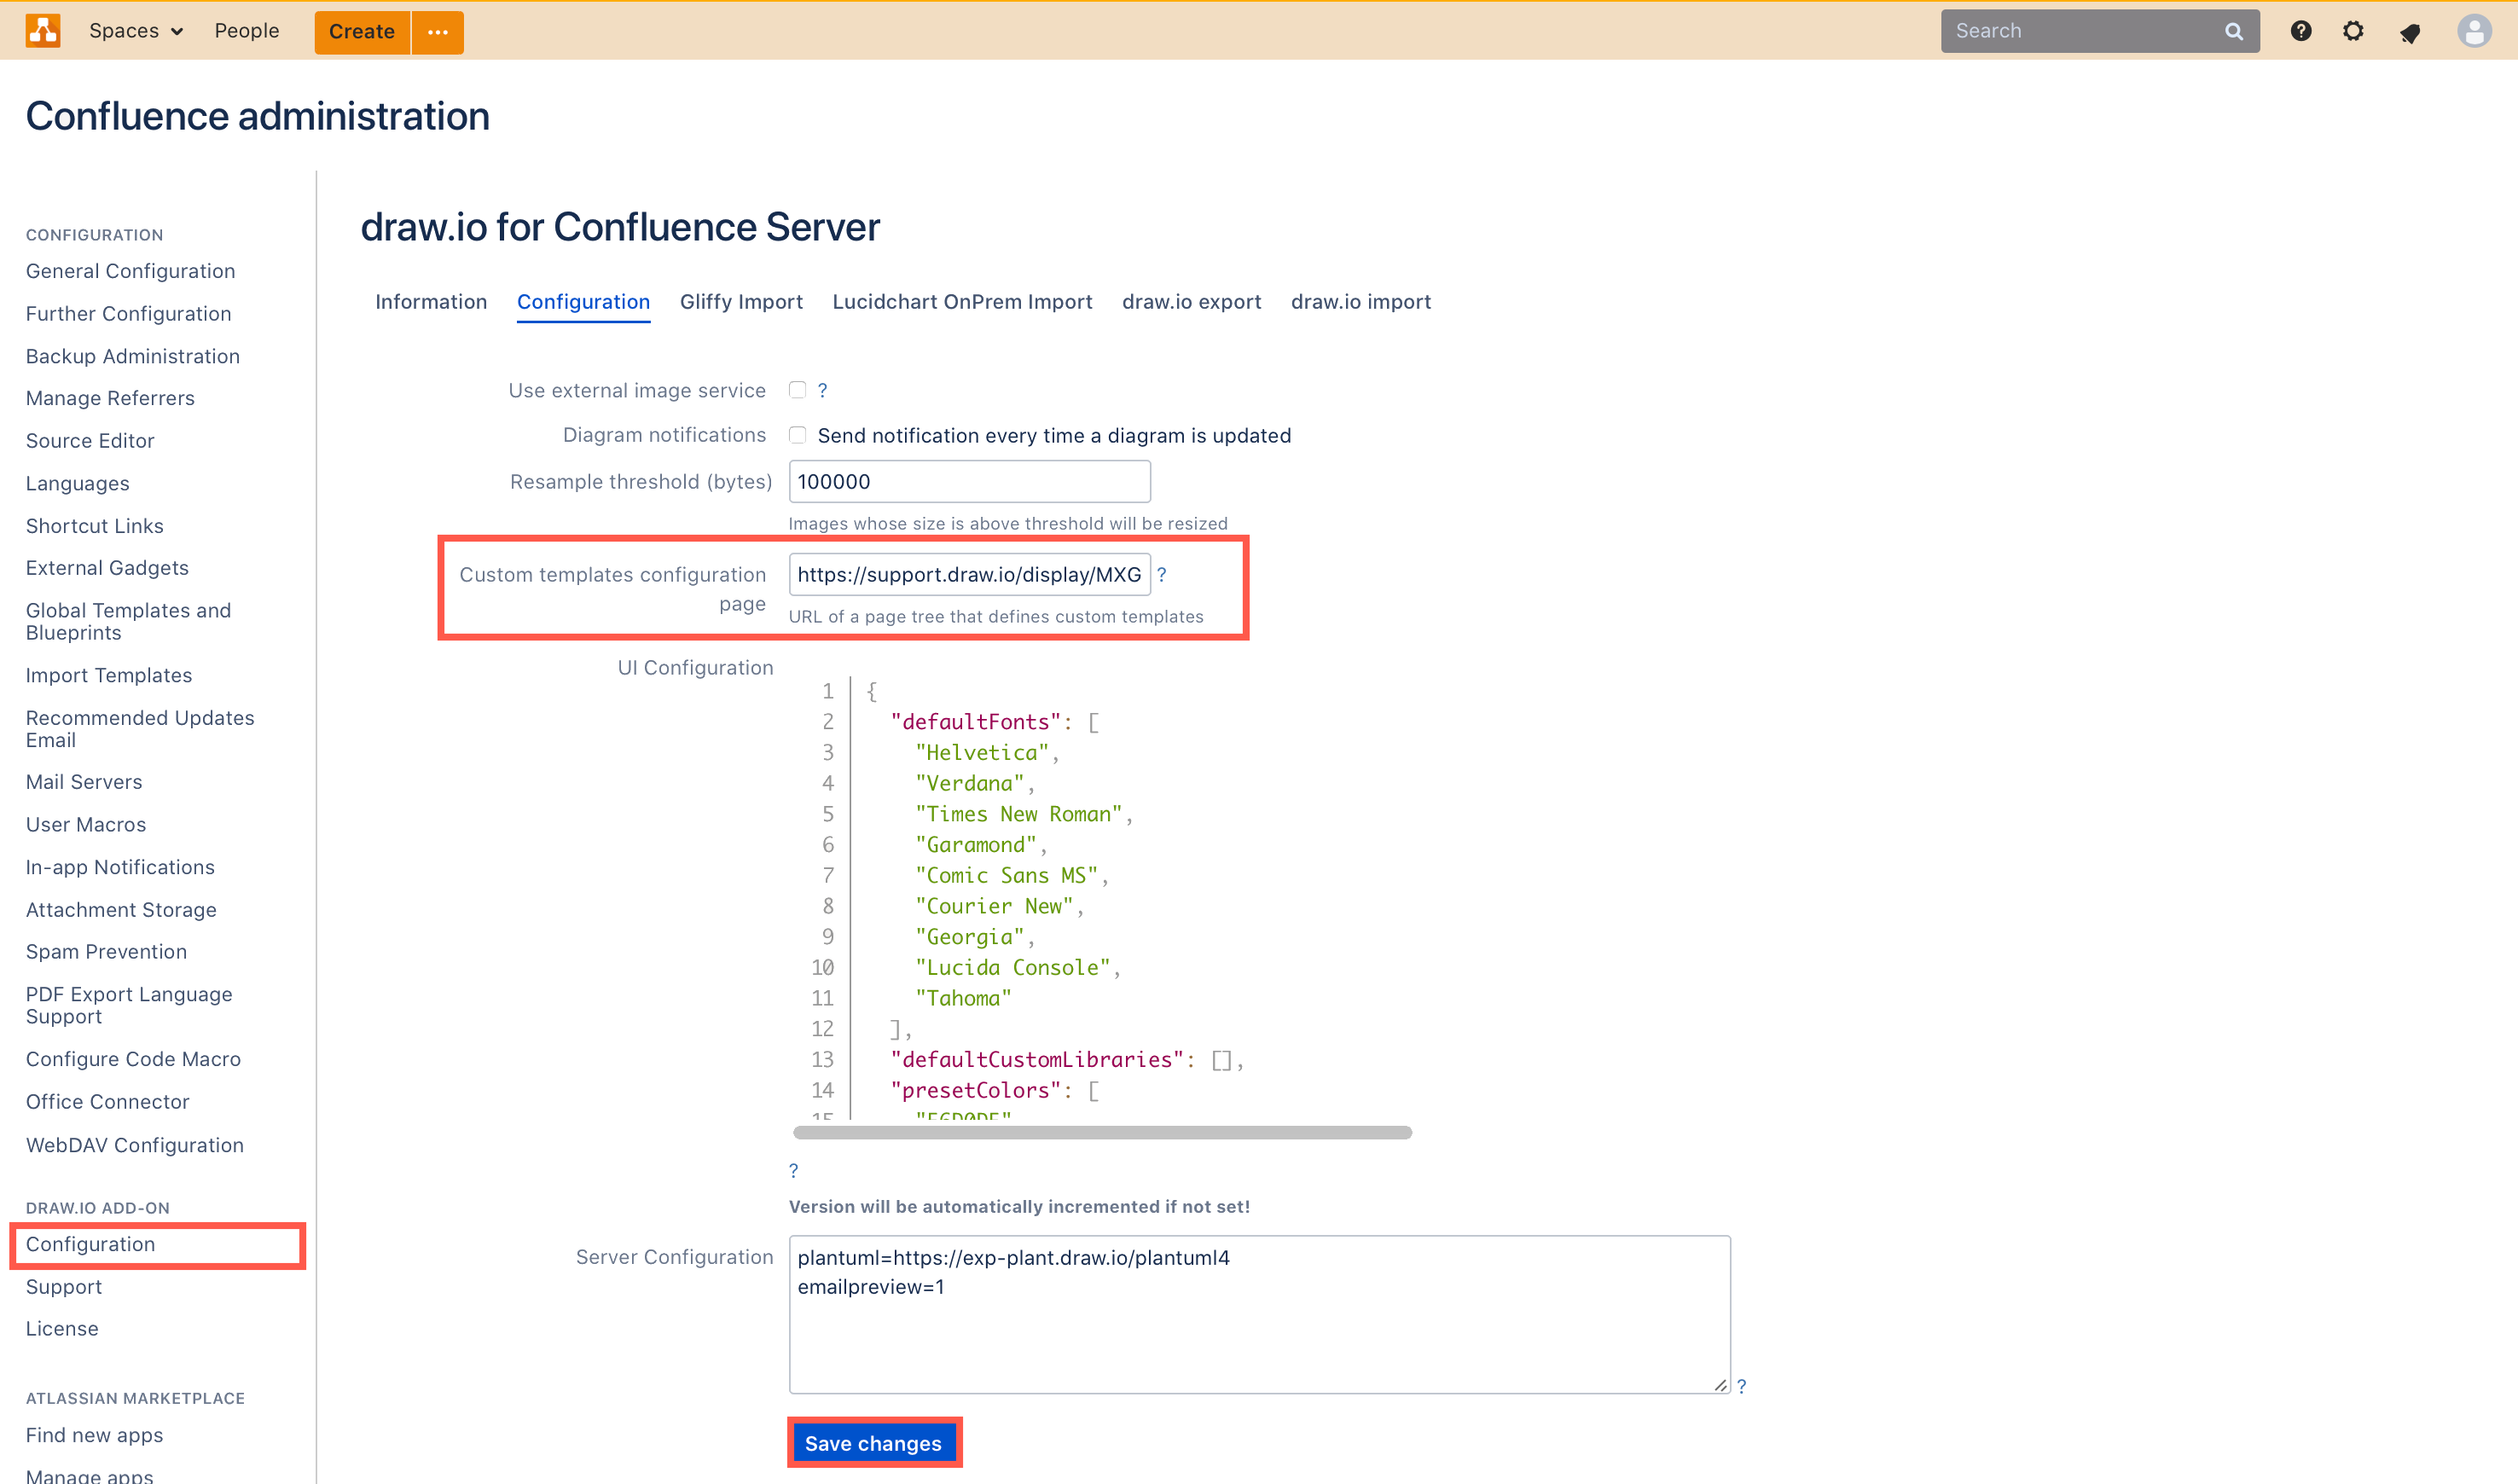 Add the custom templates parent page's URL to the draw.io configuration in the Confluence administration